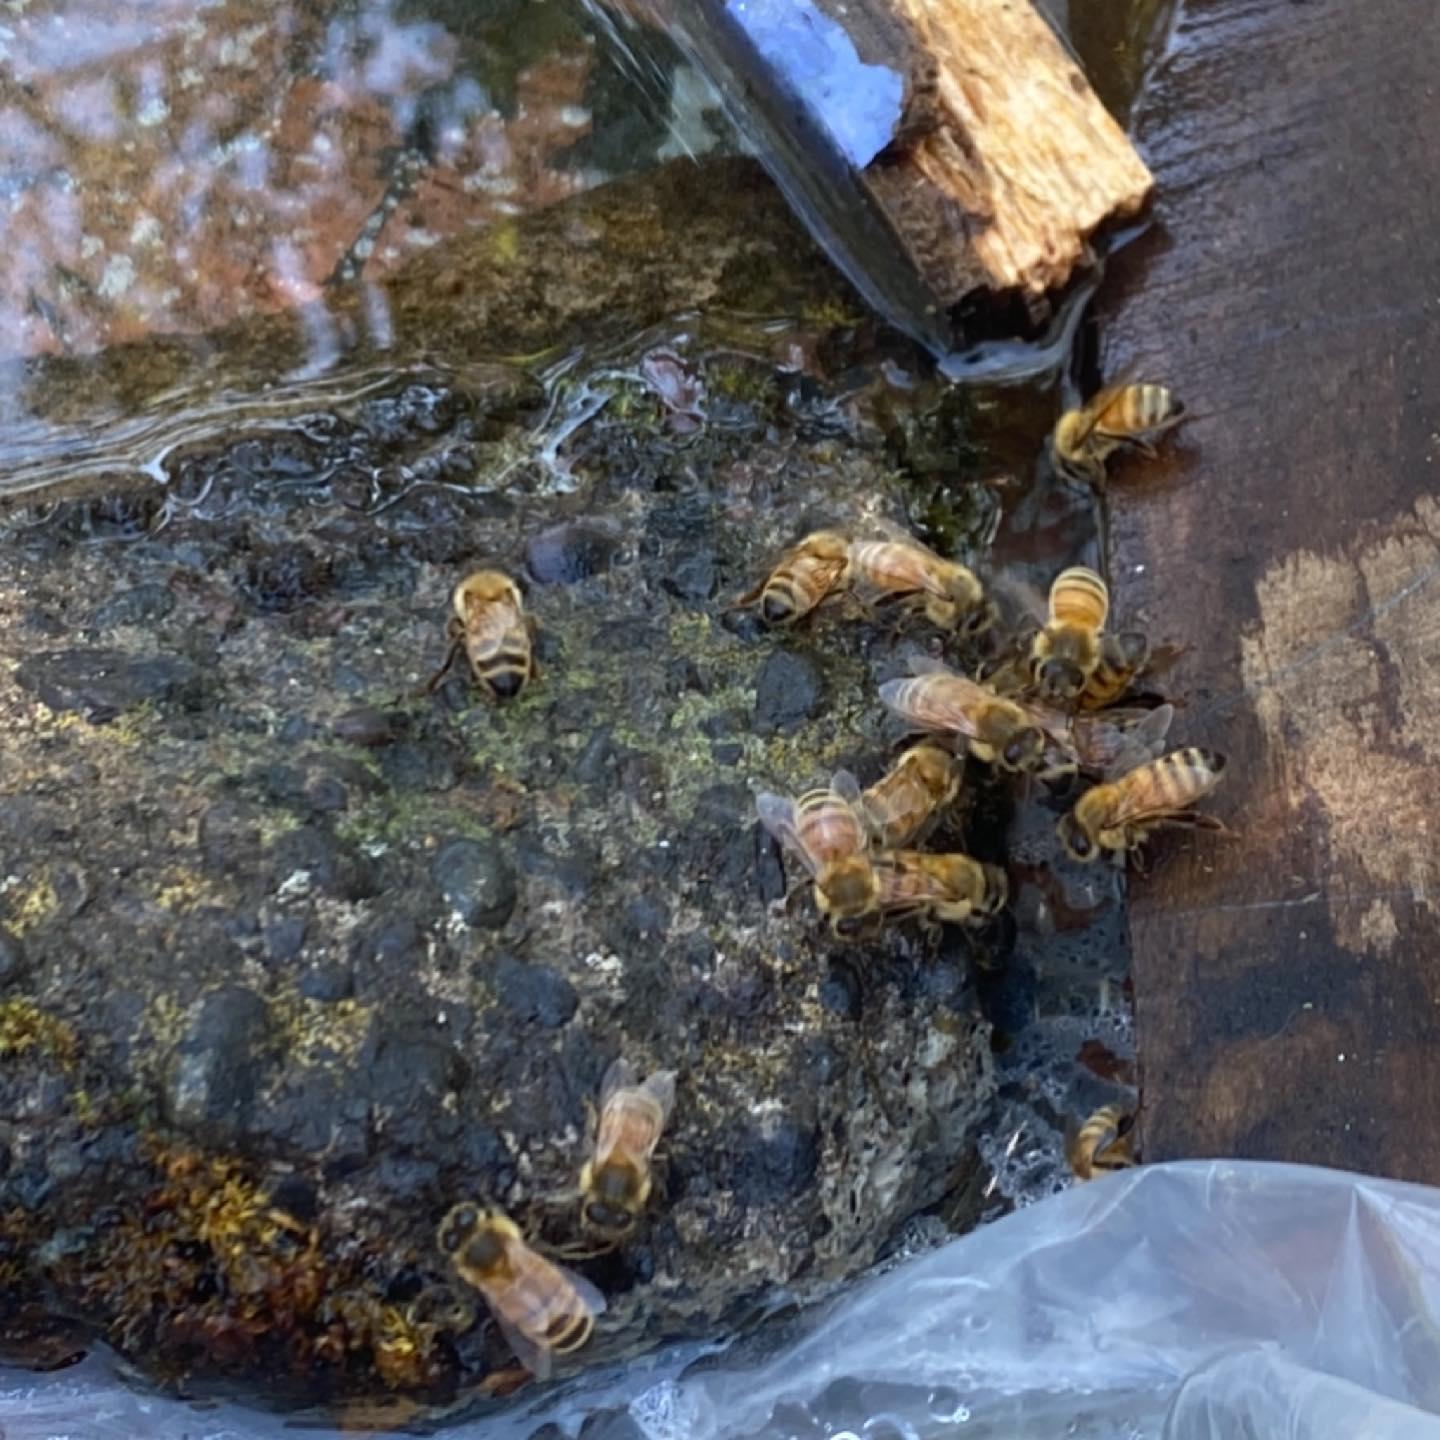 Honey bee workers are shown gathering water.